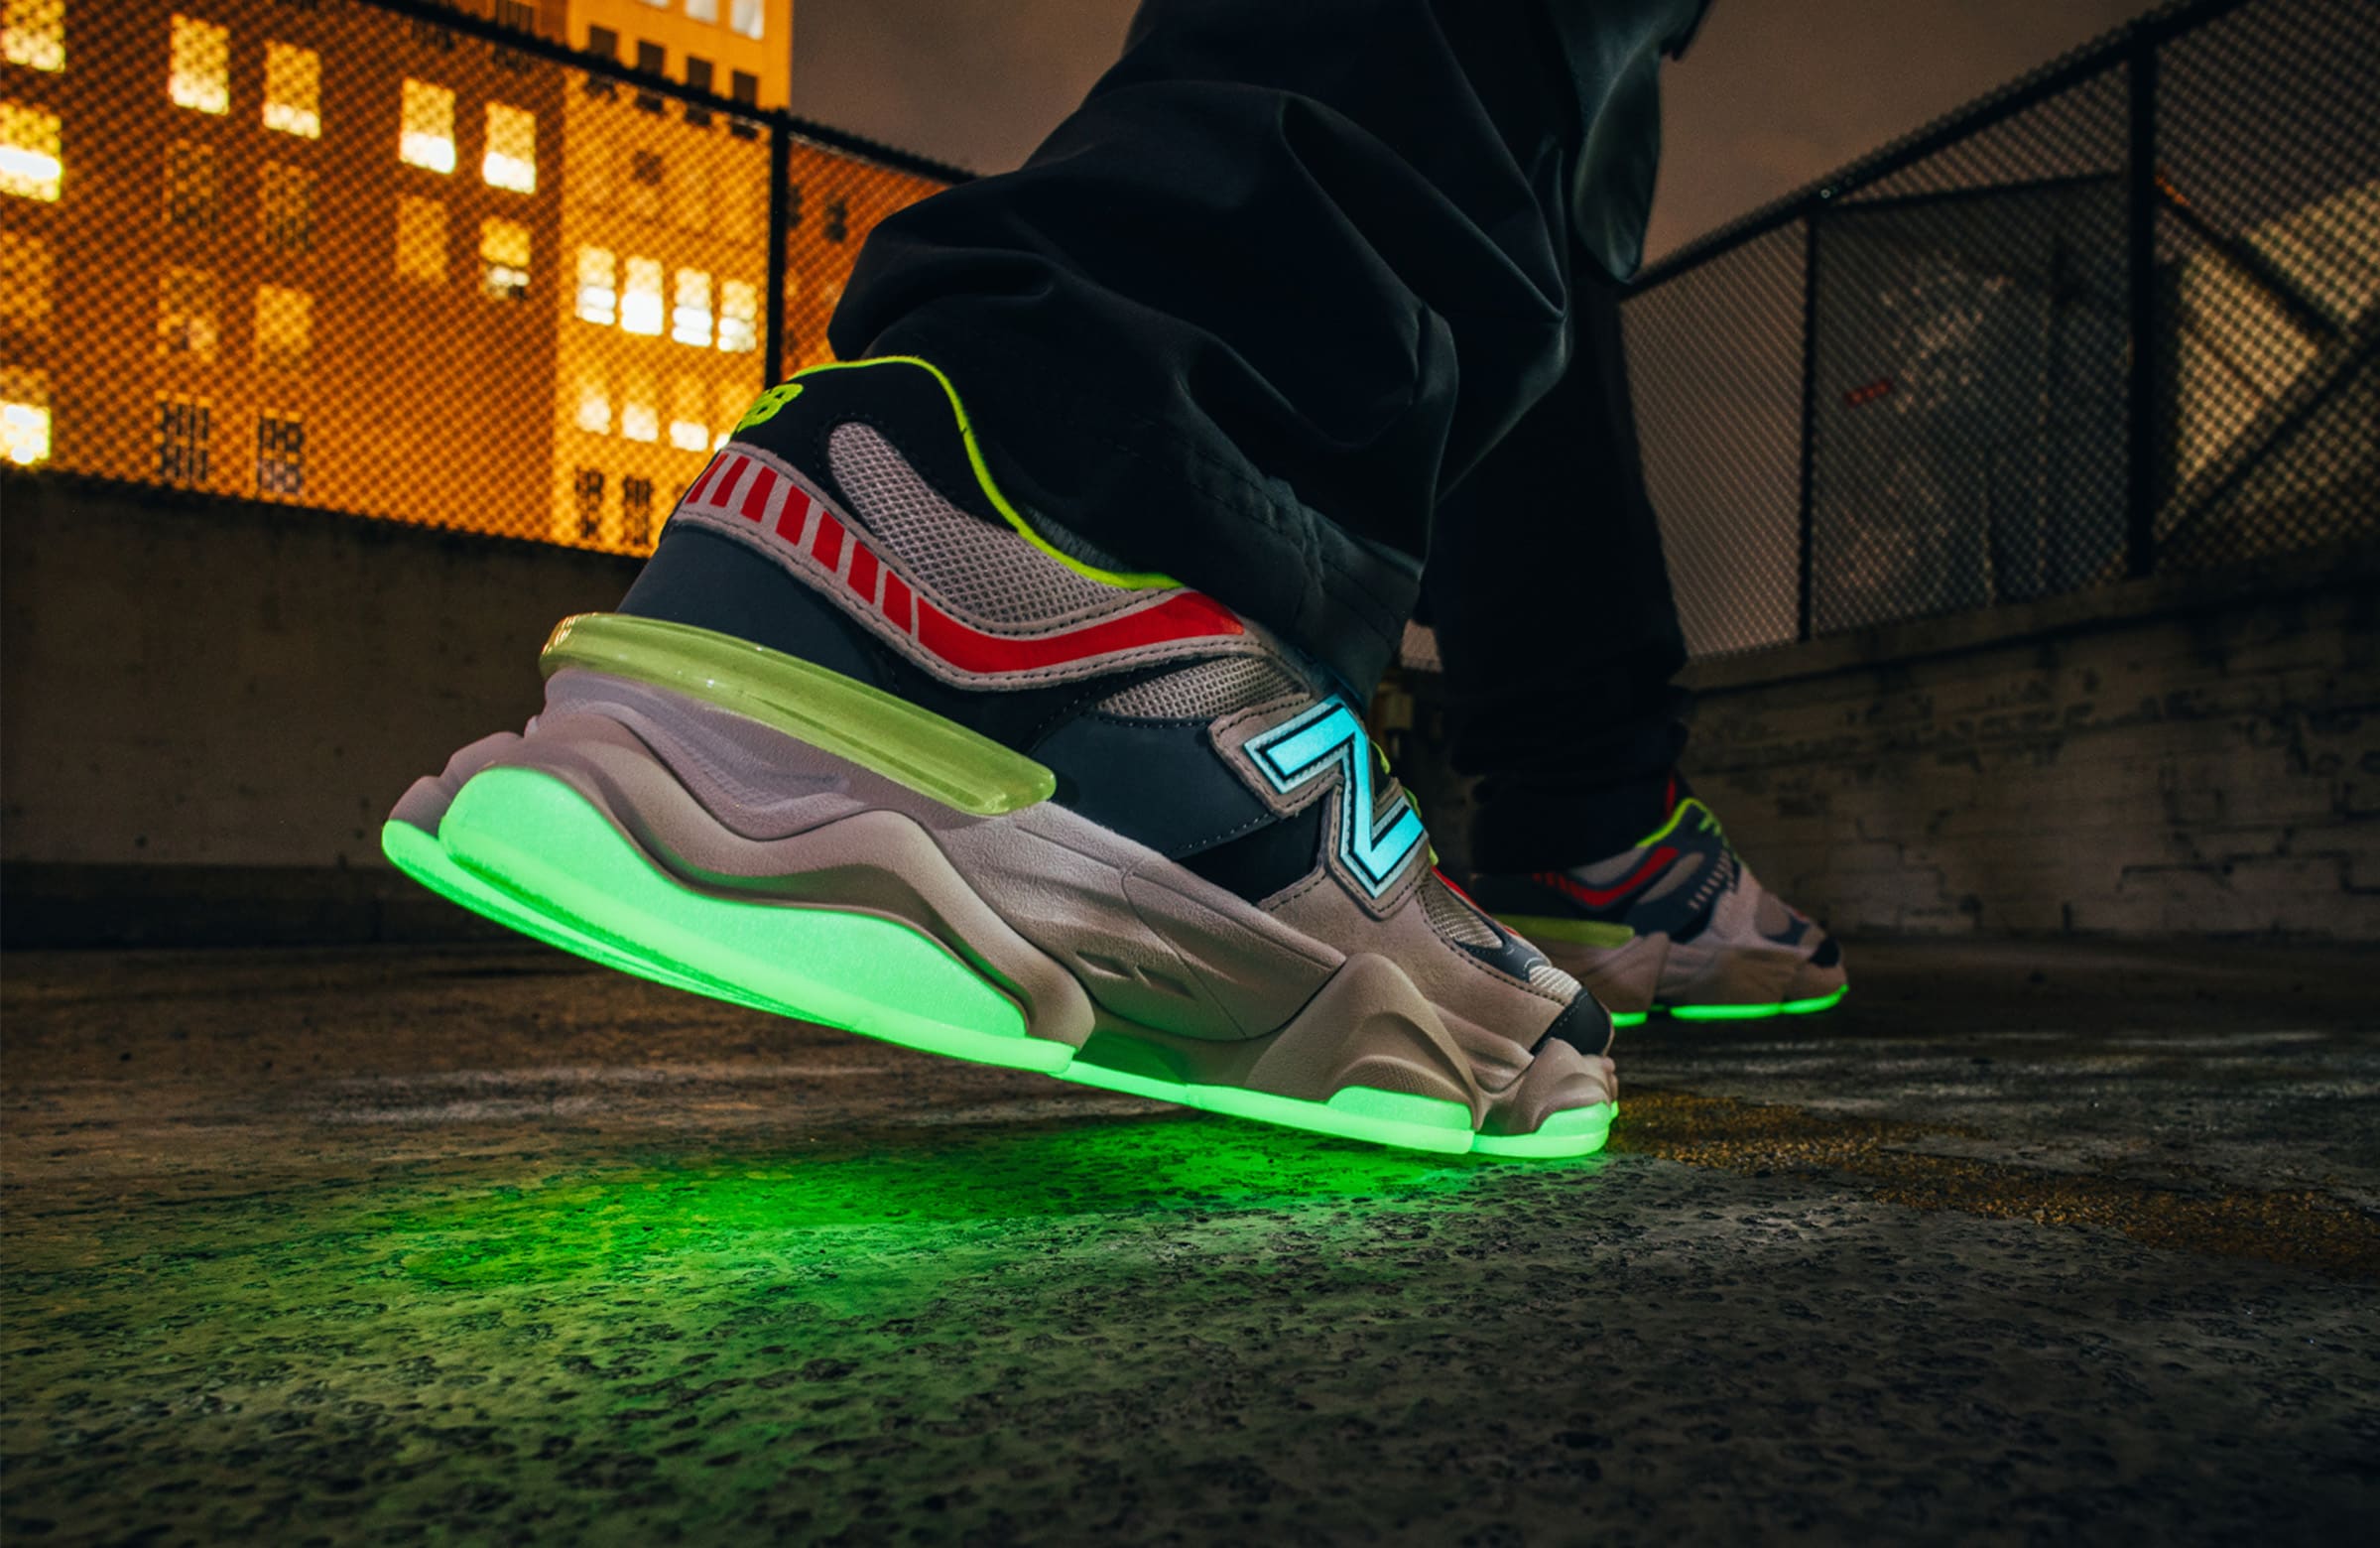 The DTLR x New Balance 9060 “Glow” is Coming Soon